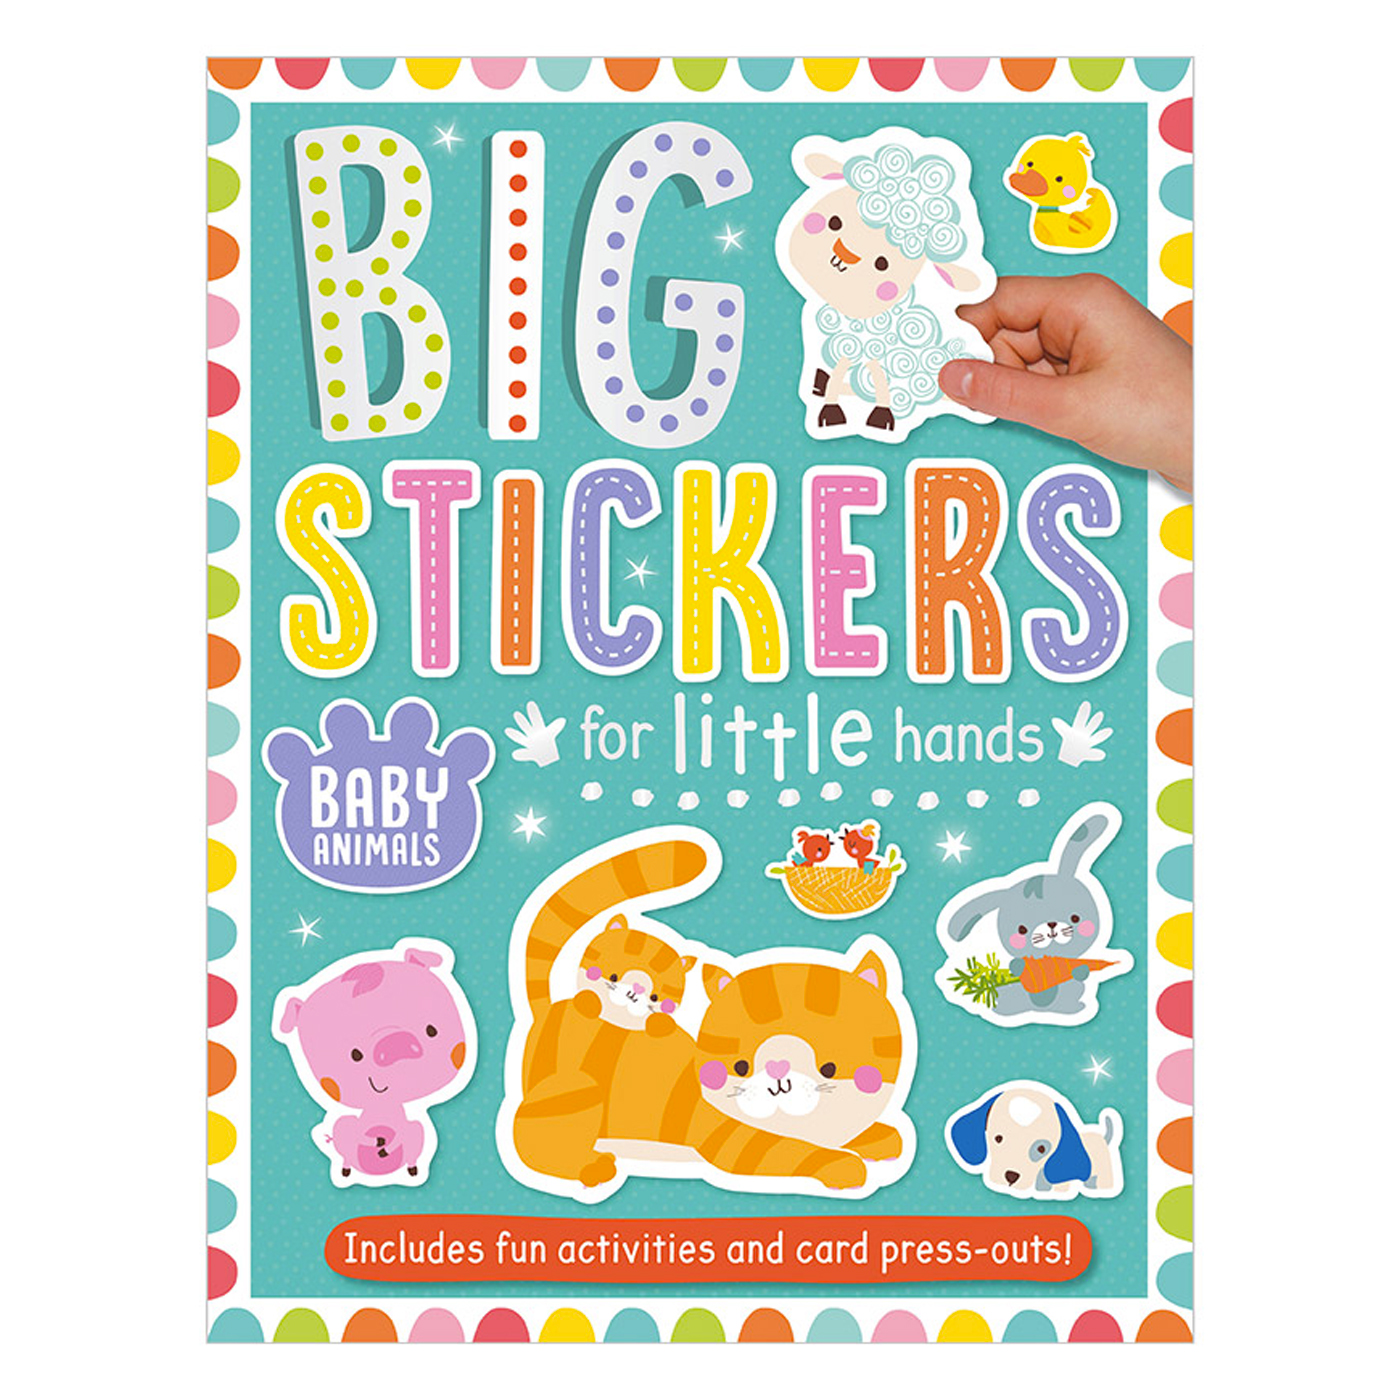  Big Stickers for Little Hands Baby Animals